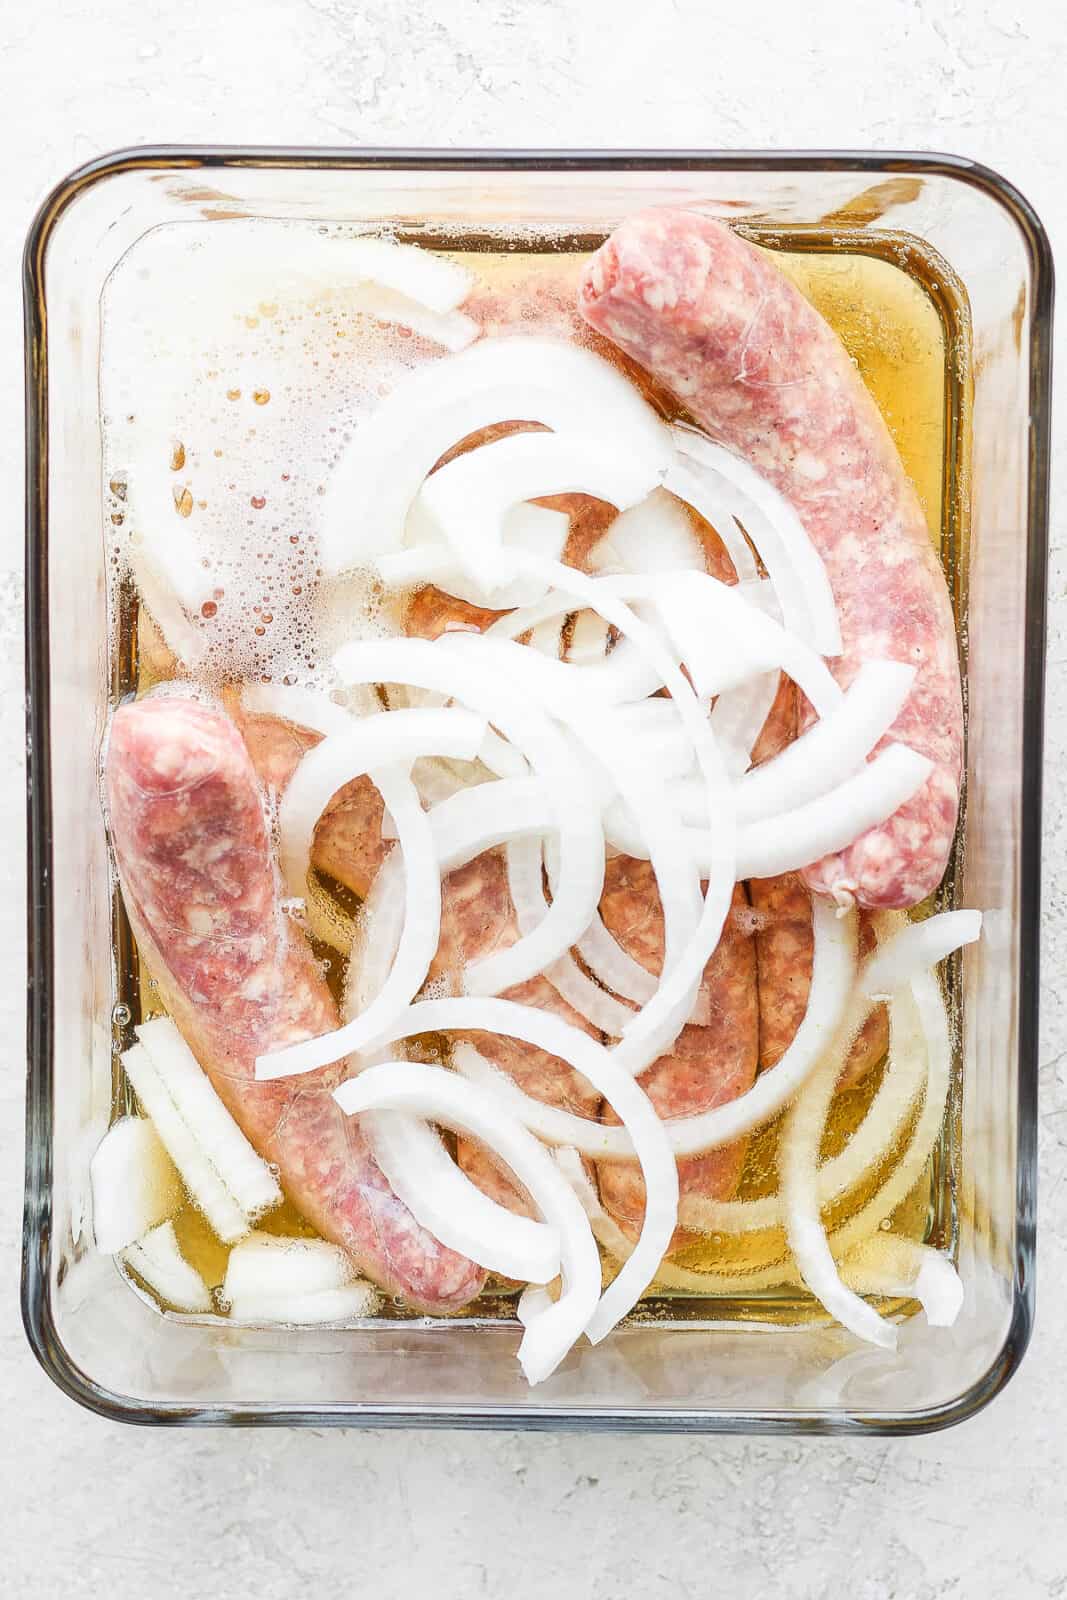 Uncooked brats marinating in beer, onions, and garlic.